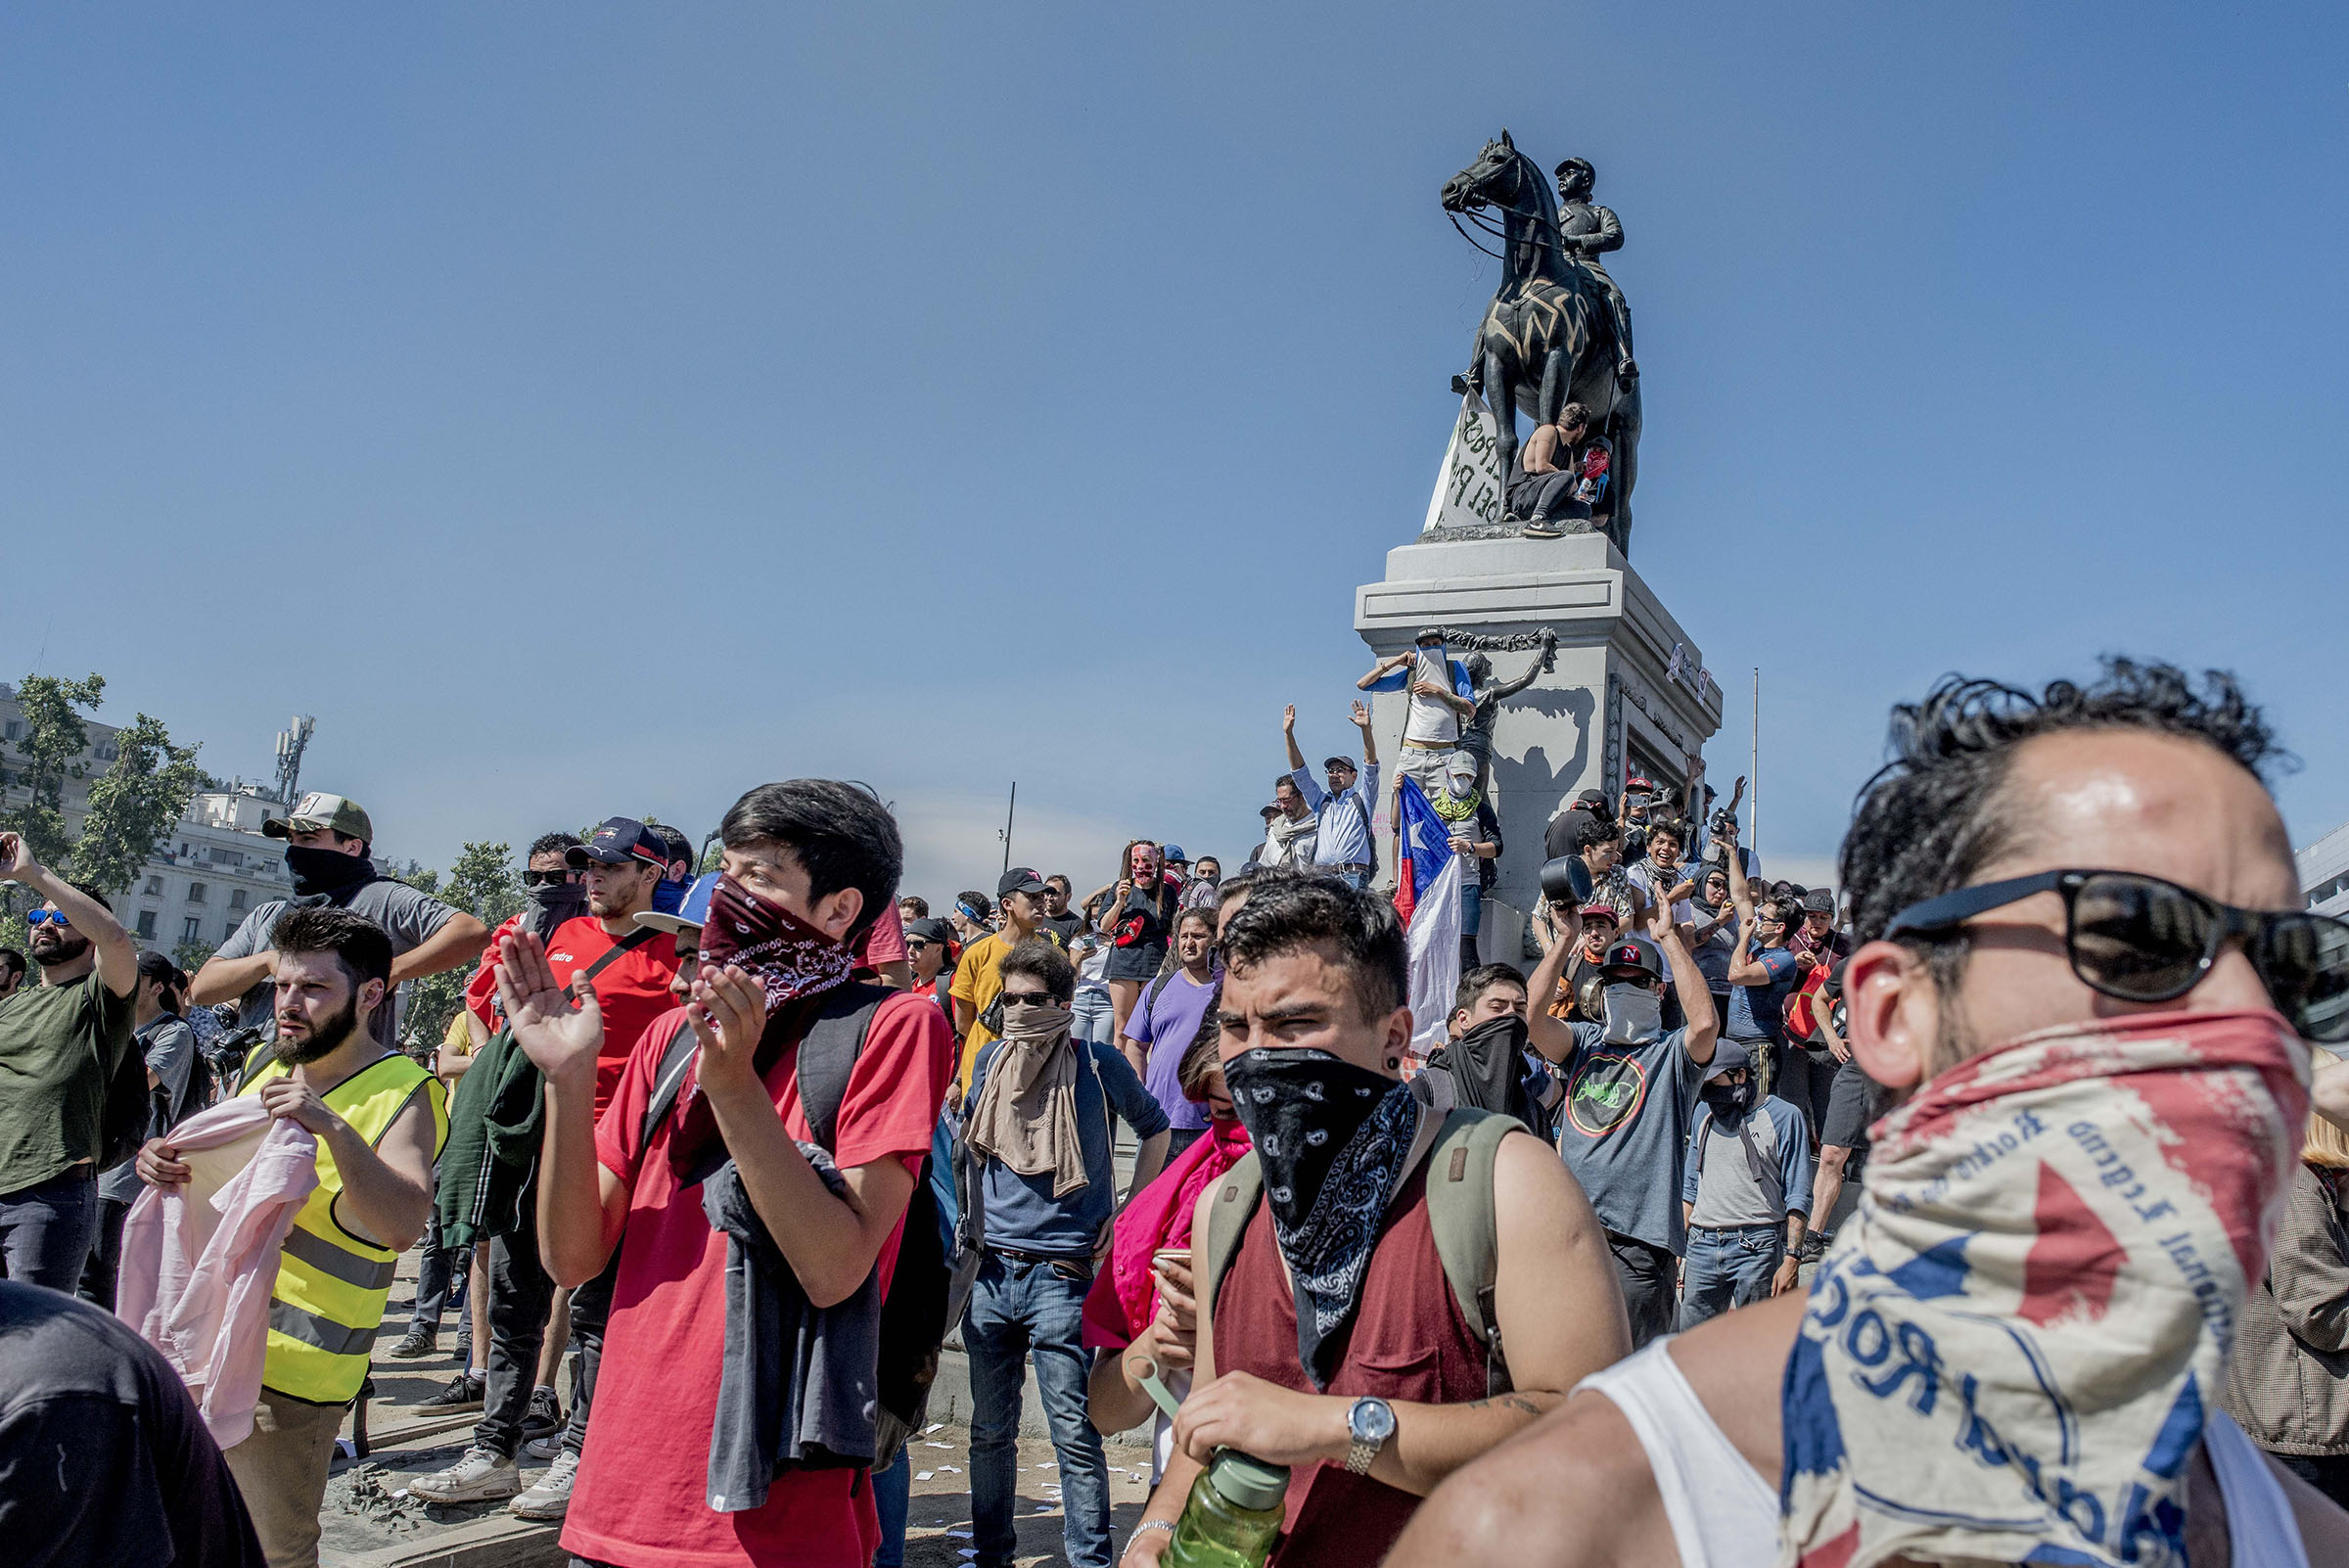 Demonstrators gather in Plaza Baquedano  during a day of protests in Santiago, Chile, Oct. 21, 2019. (Tomas Munita/The New York Times)